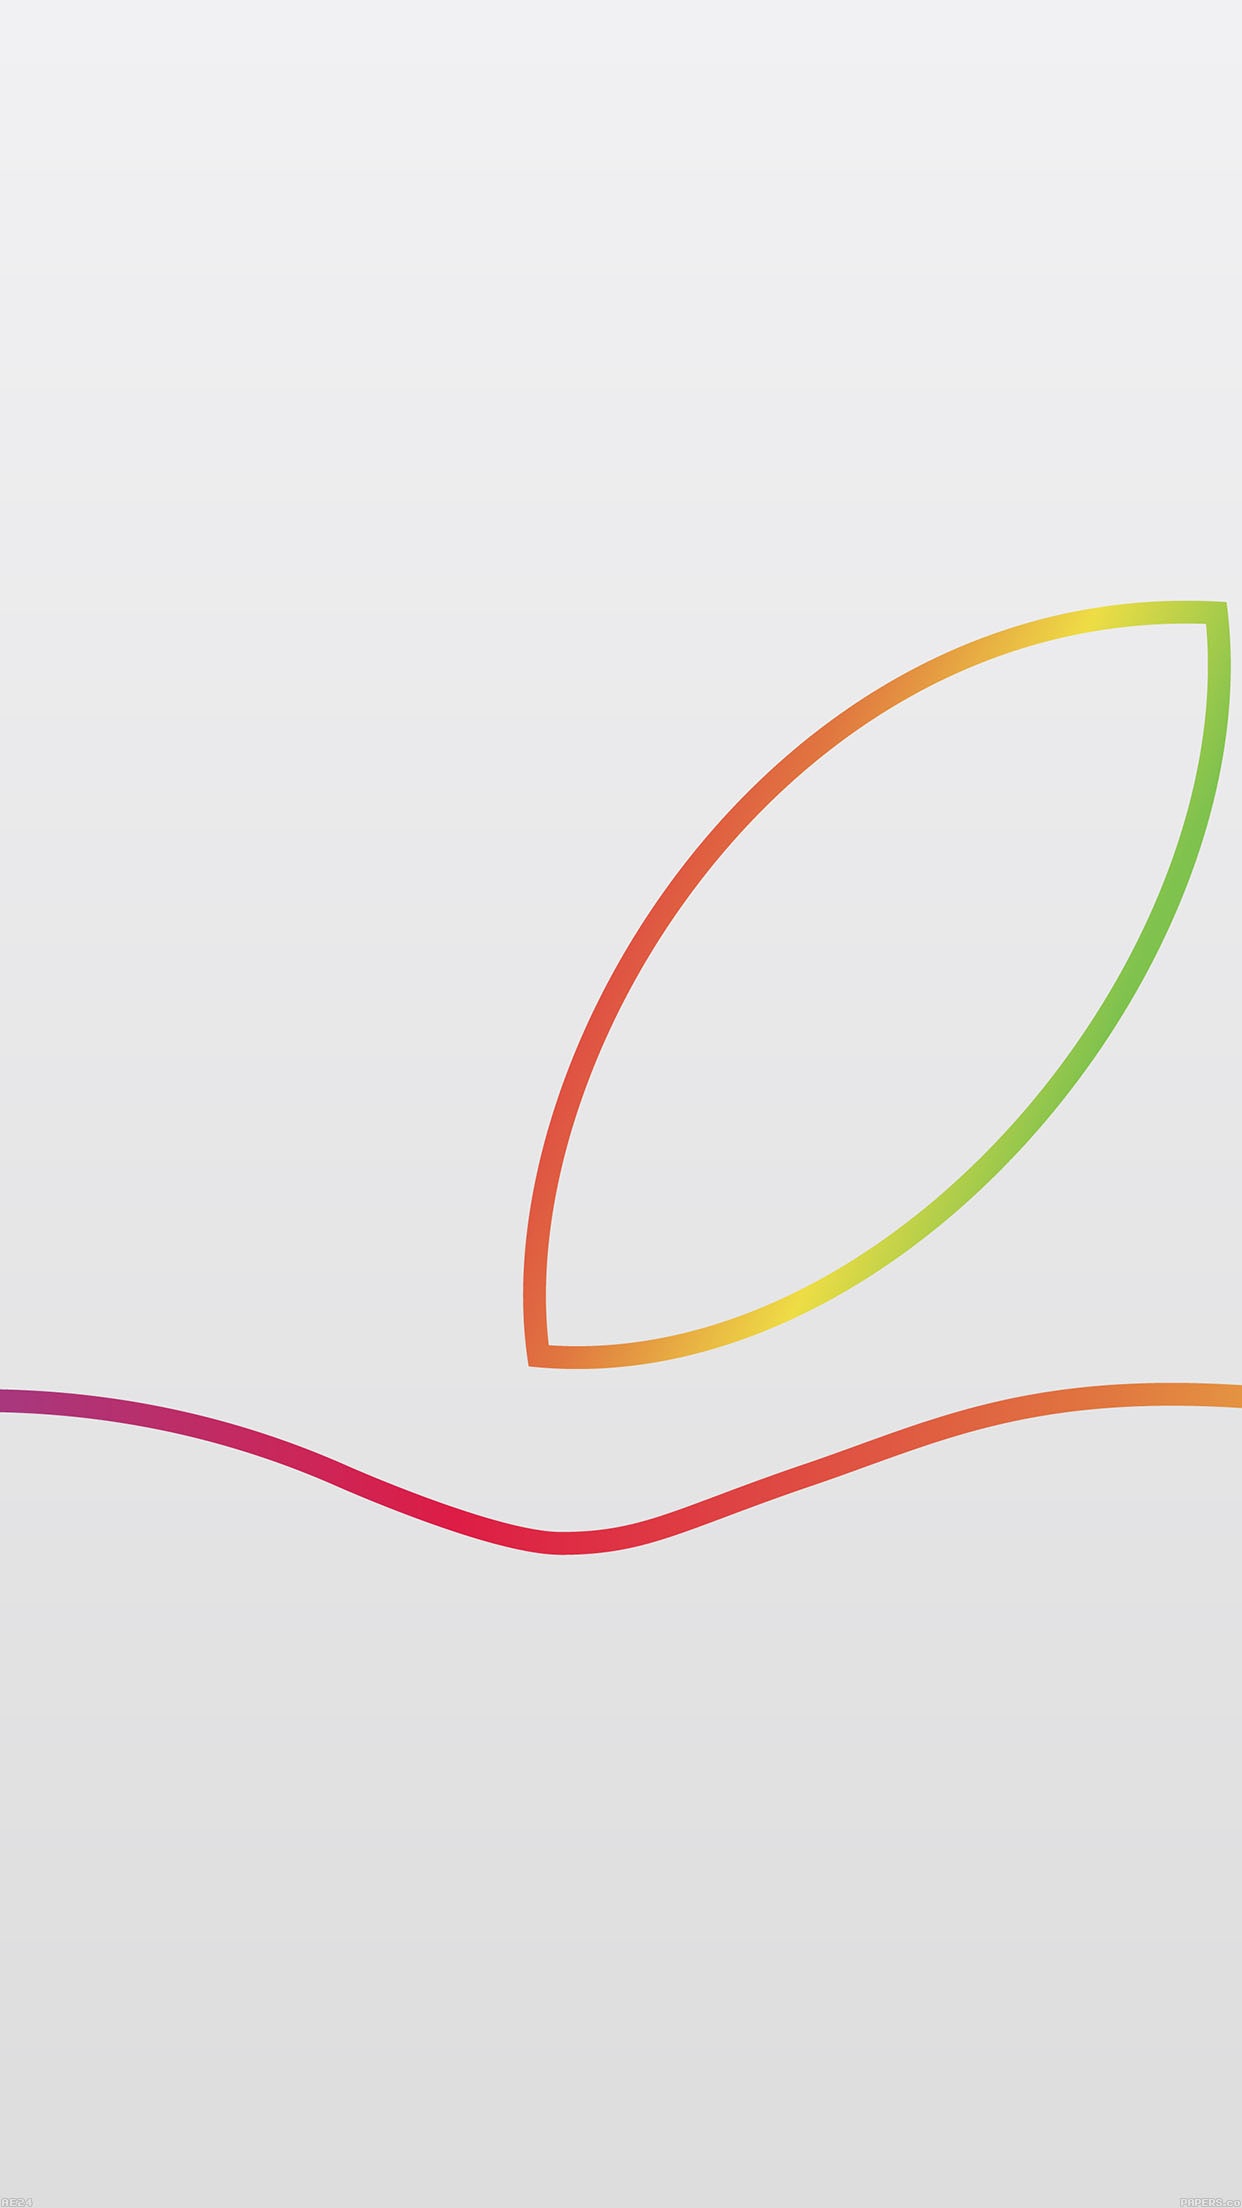 Apple Event 2014 Oct 16 Its Been Way Too Long Android wallpaper